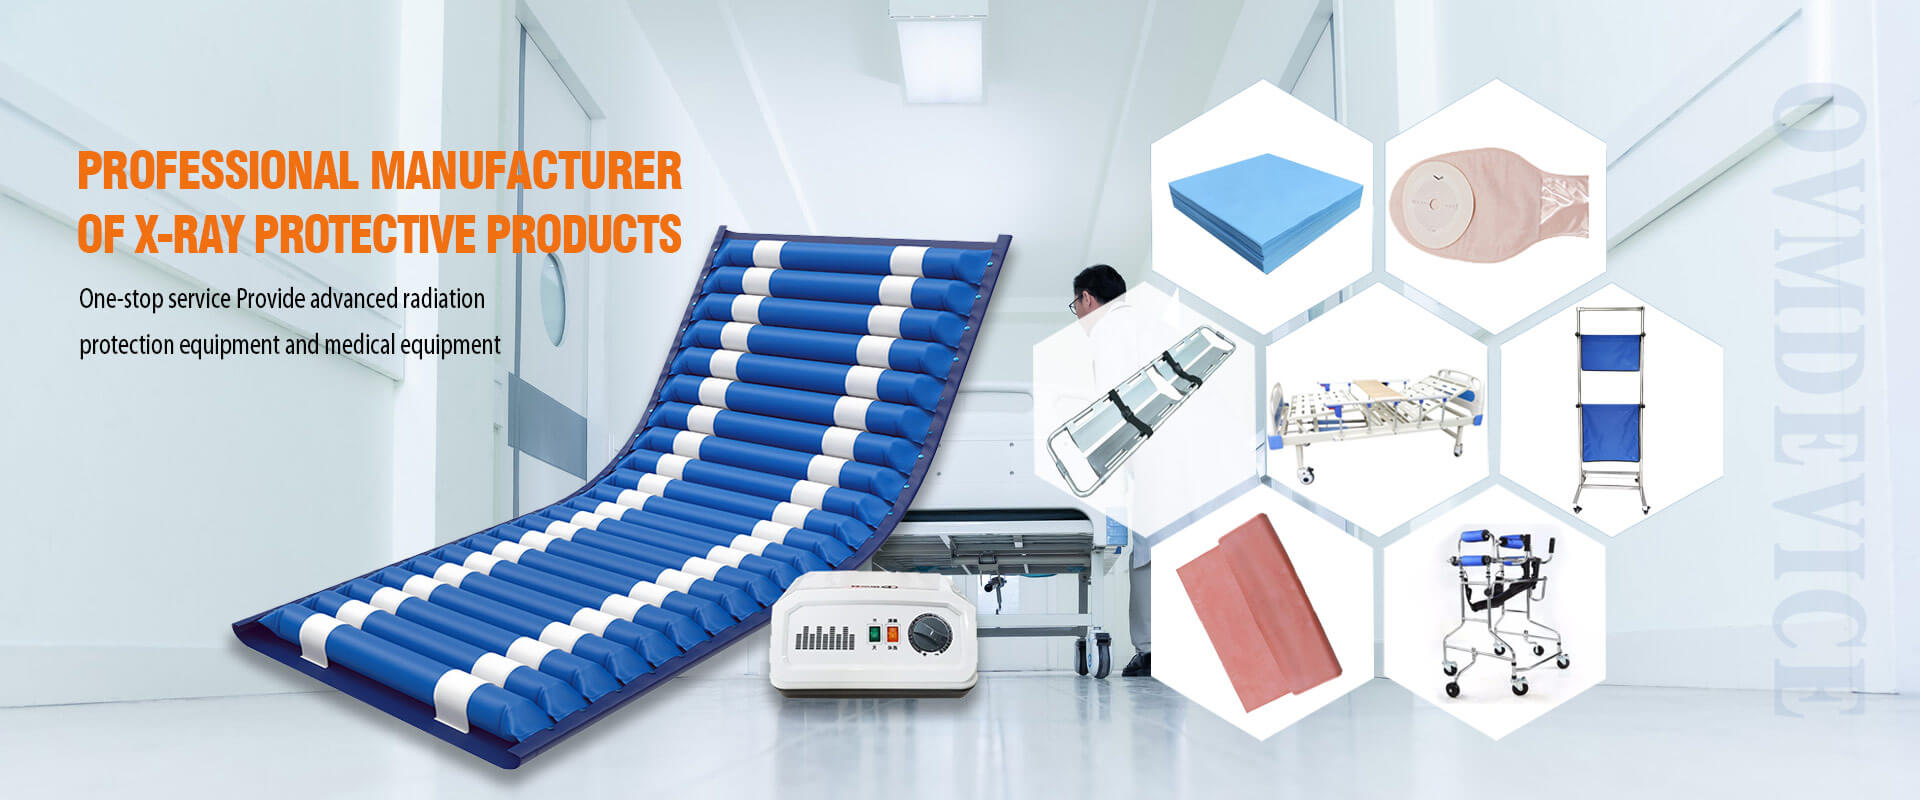 one step supply hospital and rehabilitation medical devices such as alternating inflatable pressure air mattress, hospital beds, rehabilitation chairs, etc.